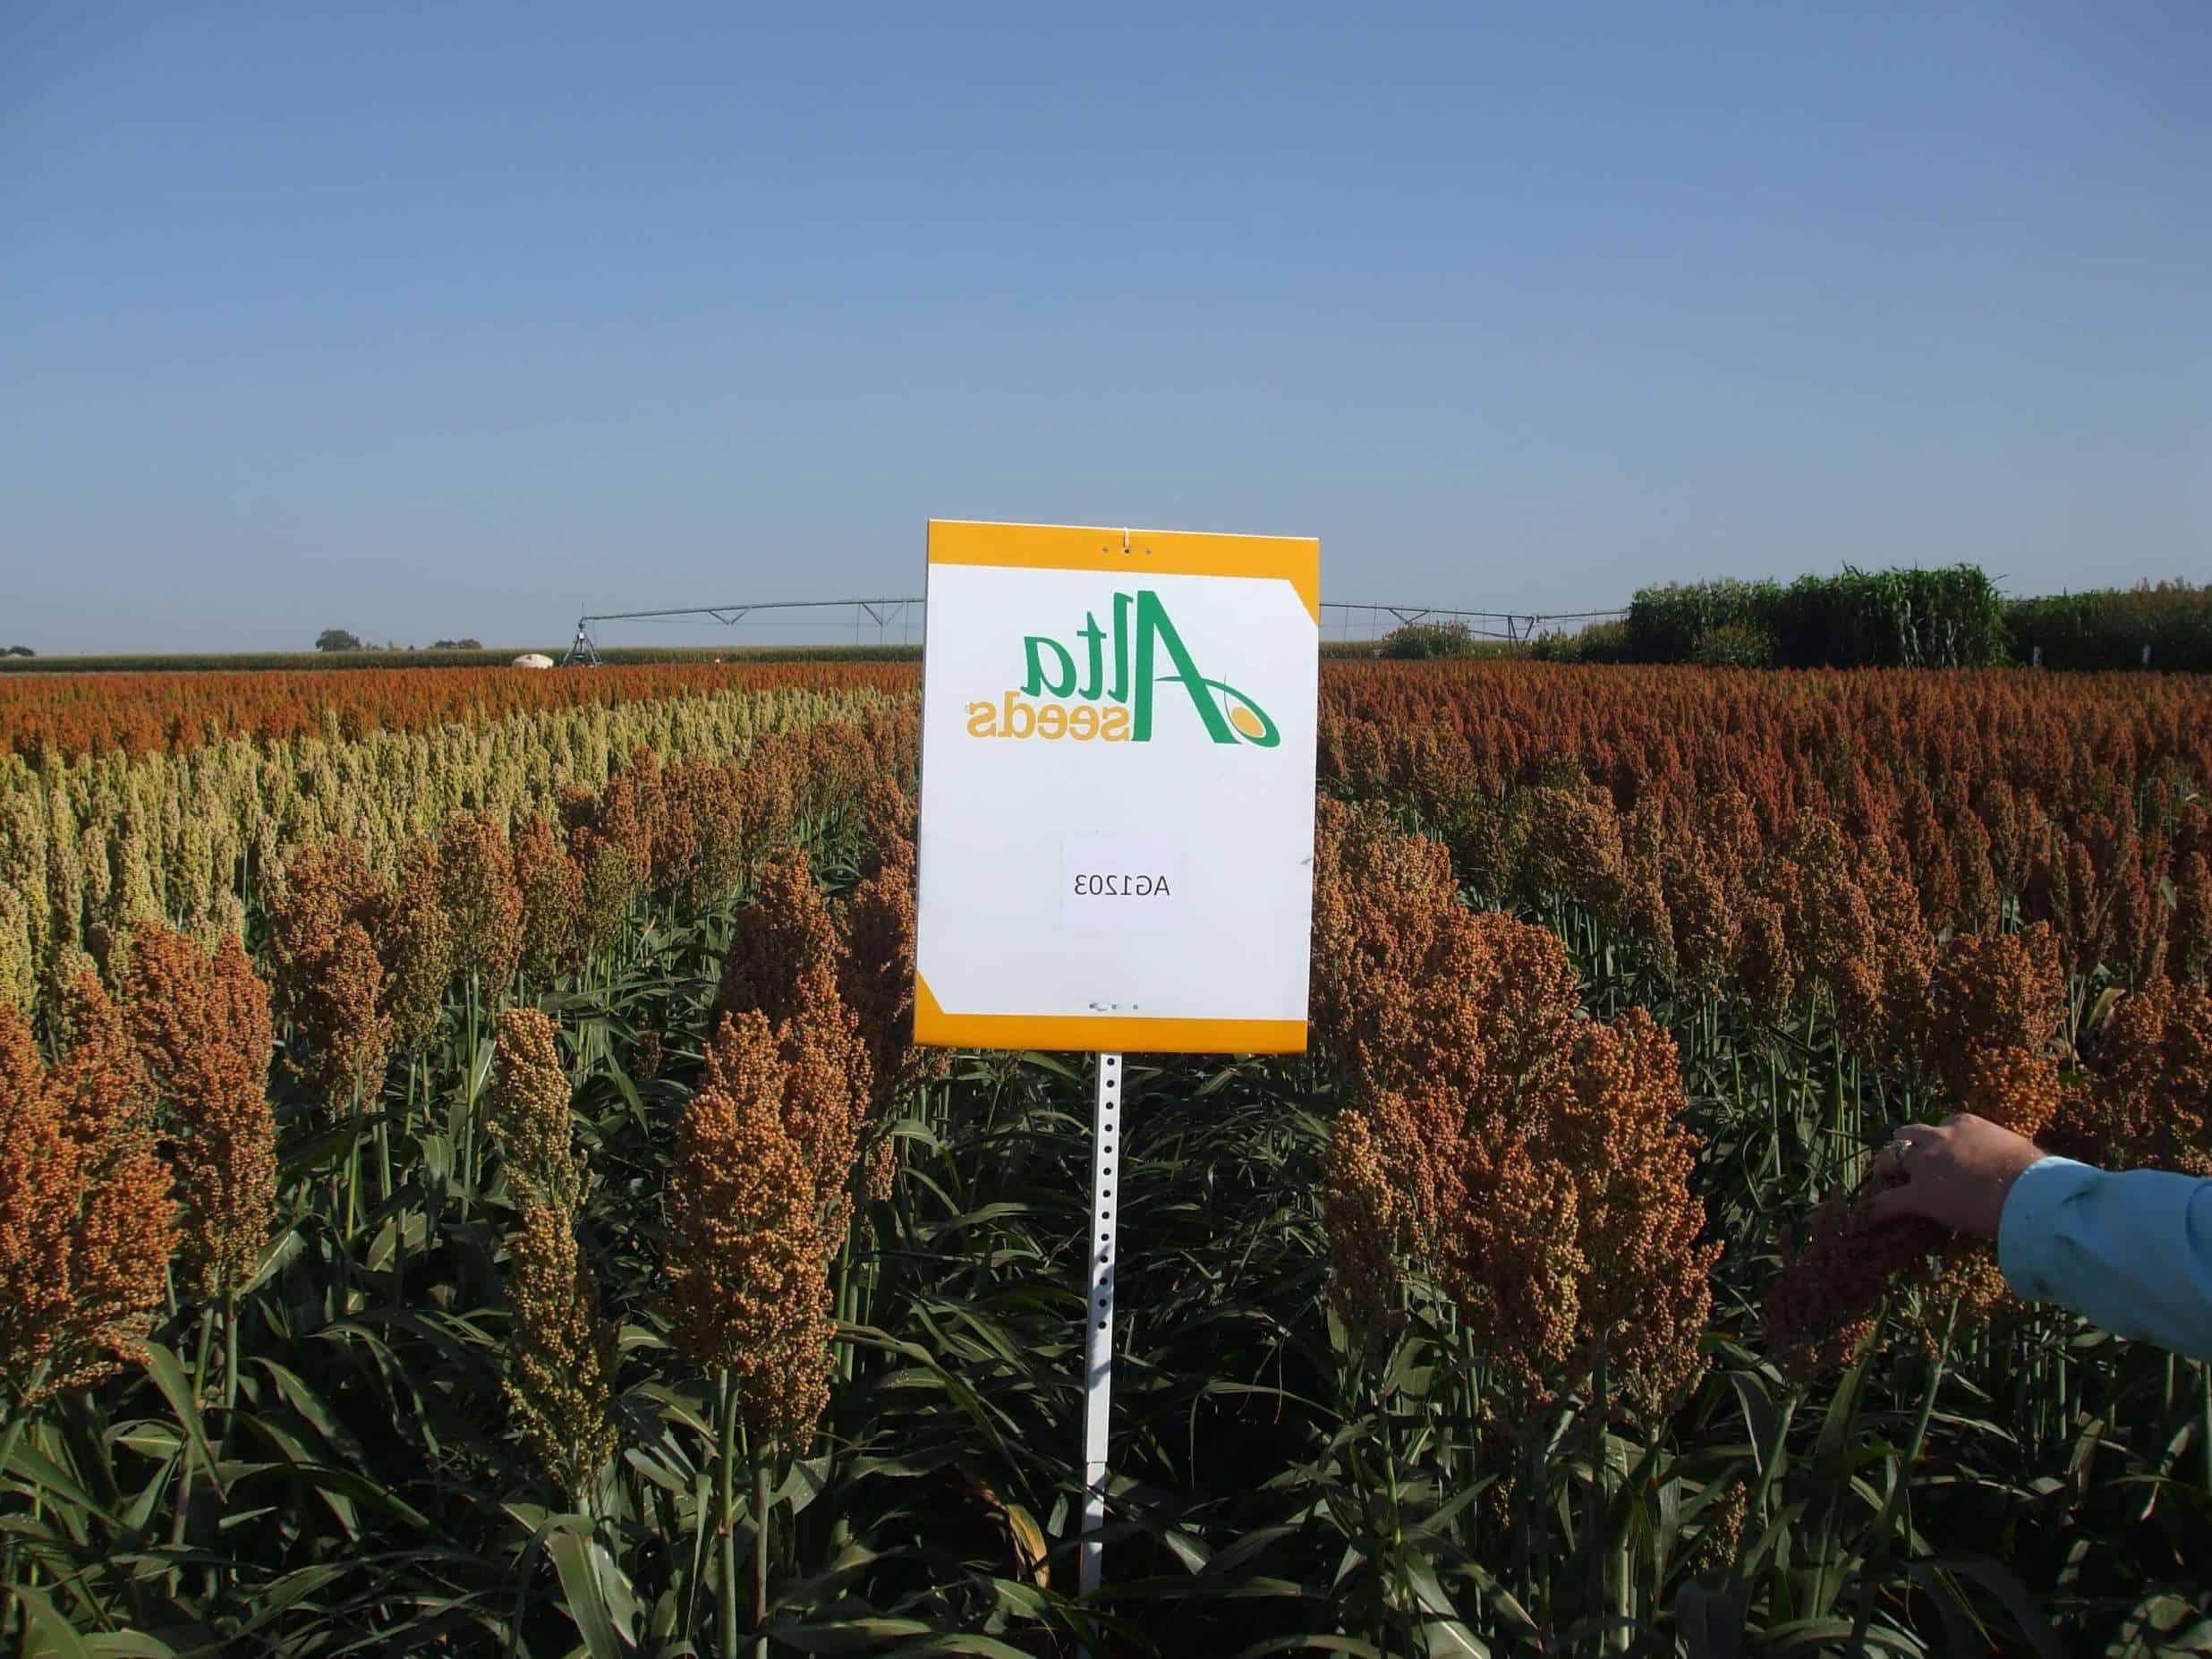 Sign next to crops